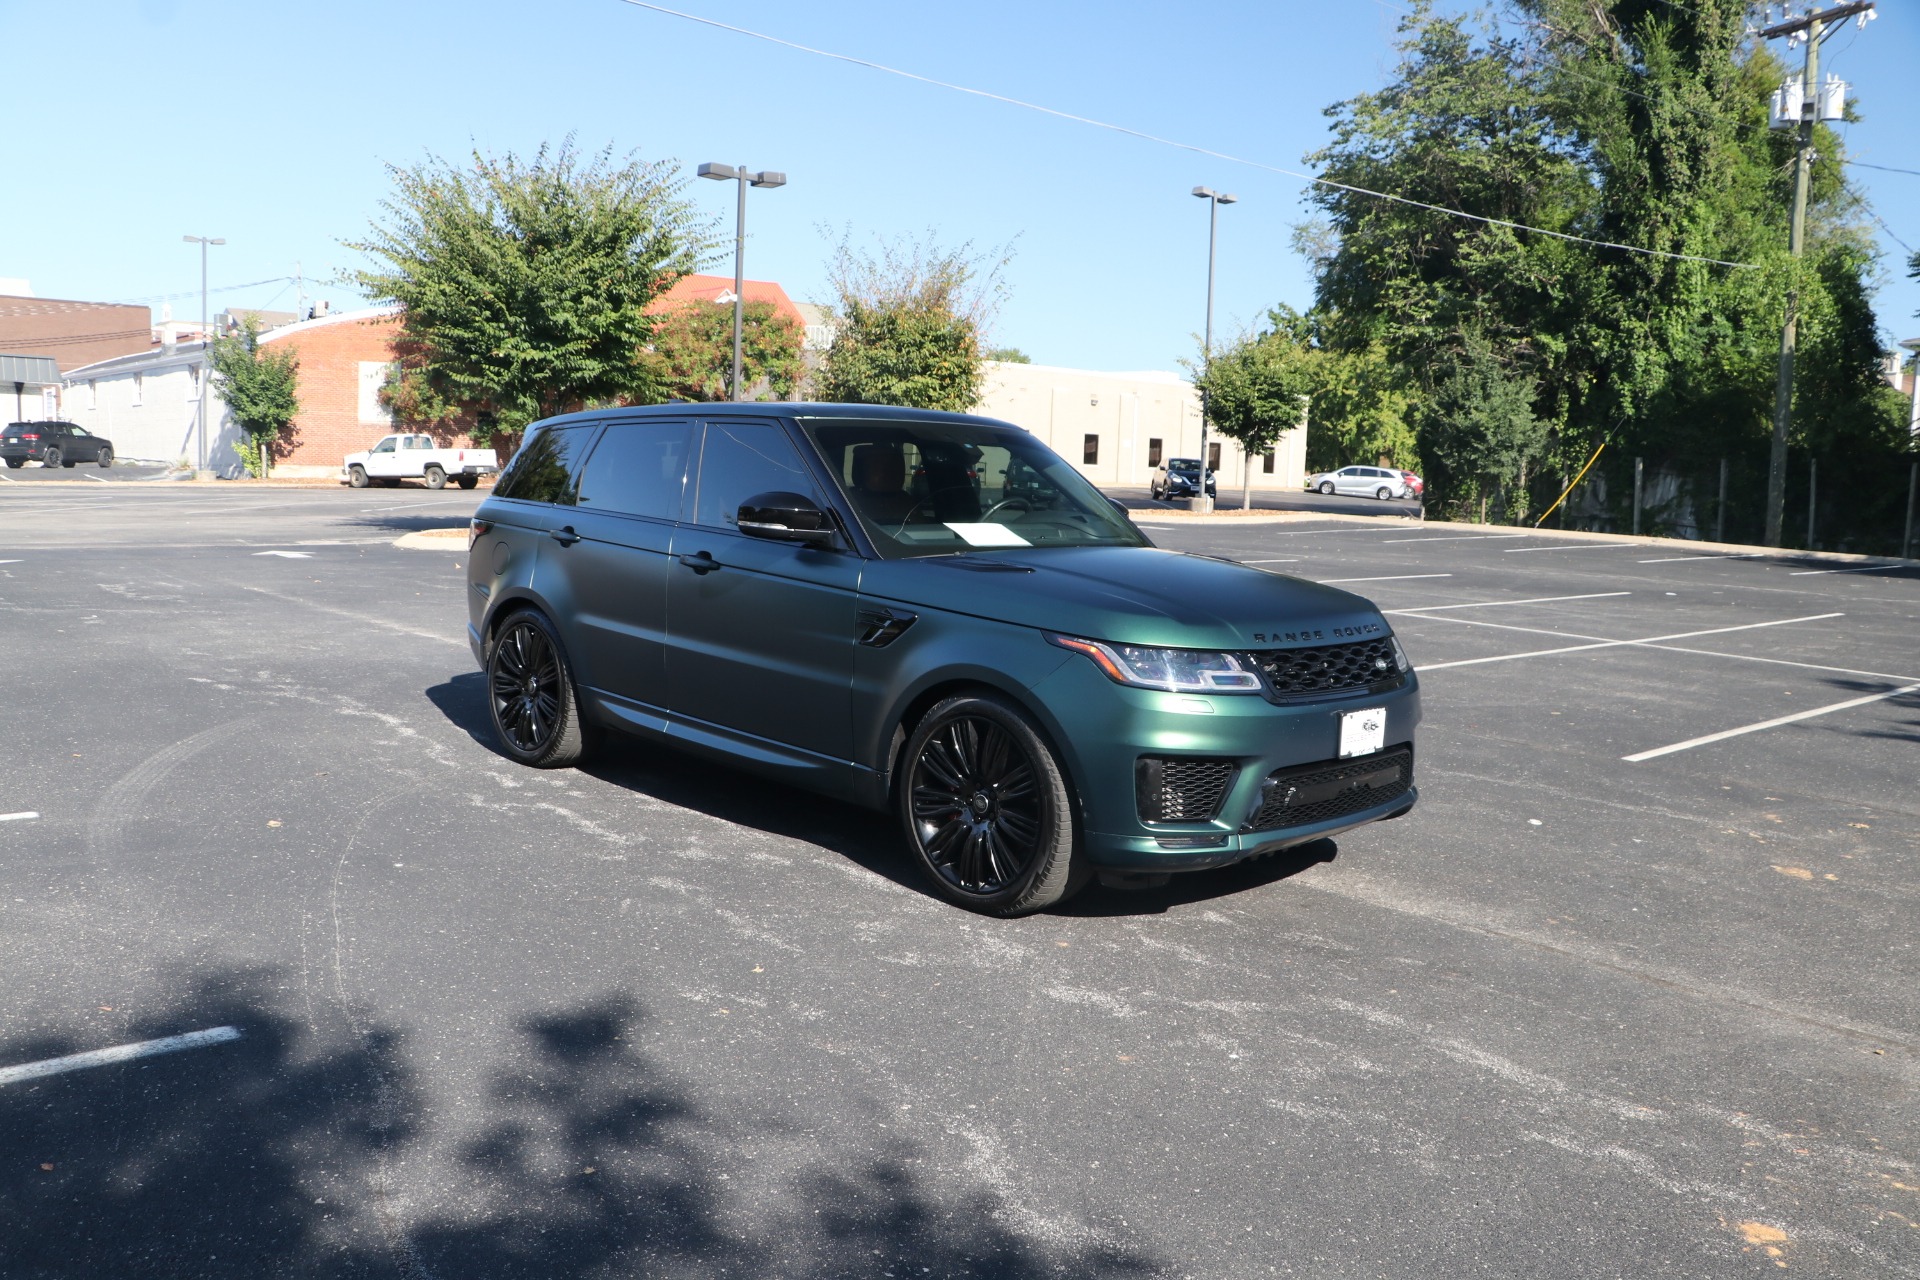 Used 2020 Land Rover Range Rover Sport P525 Autobiography W/Svo Special Effect Paint In Satin Finish Package for sale Sold at Auto Collection in Murfreesboro TN 37129 1